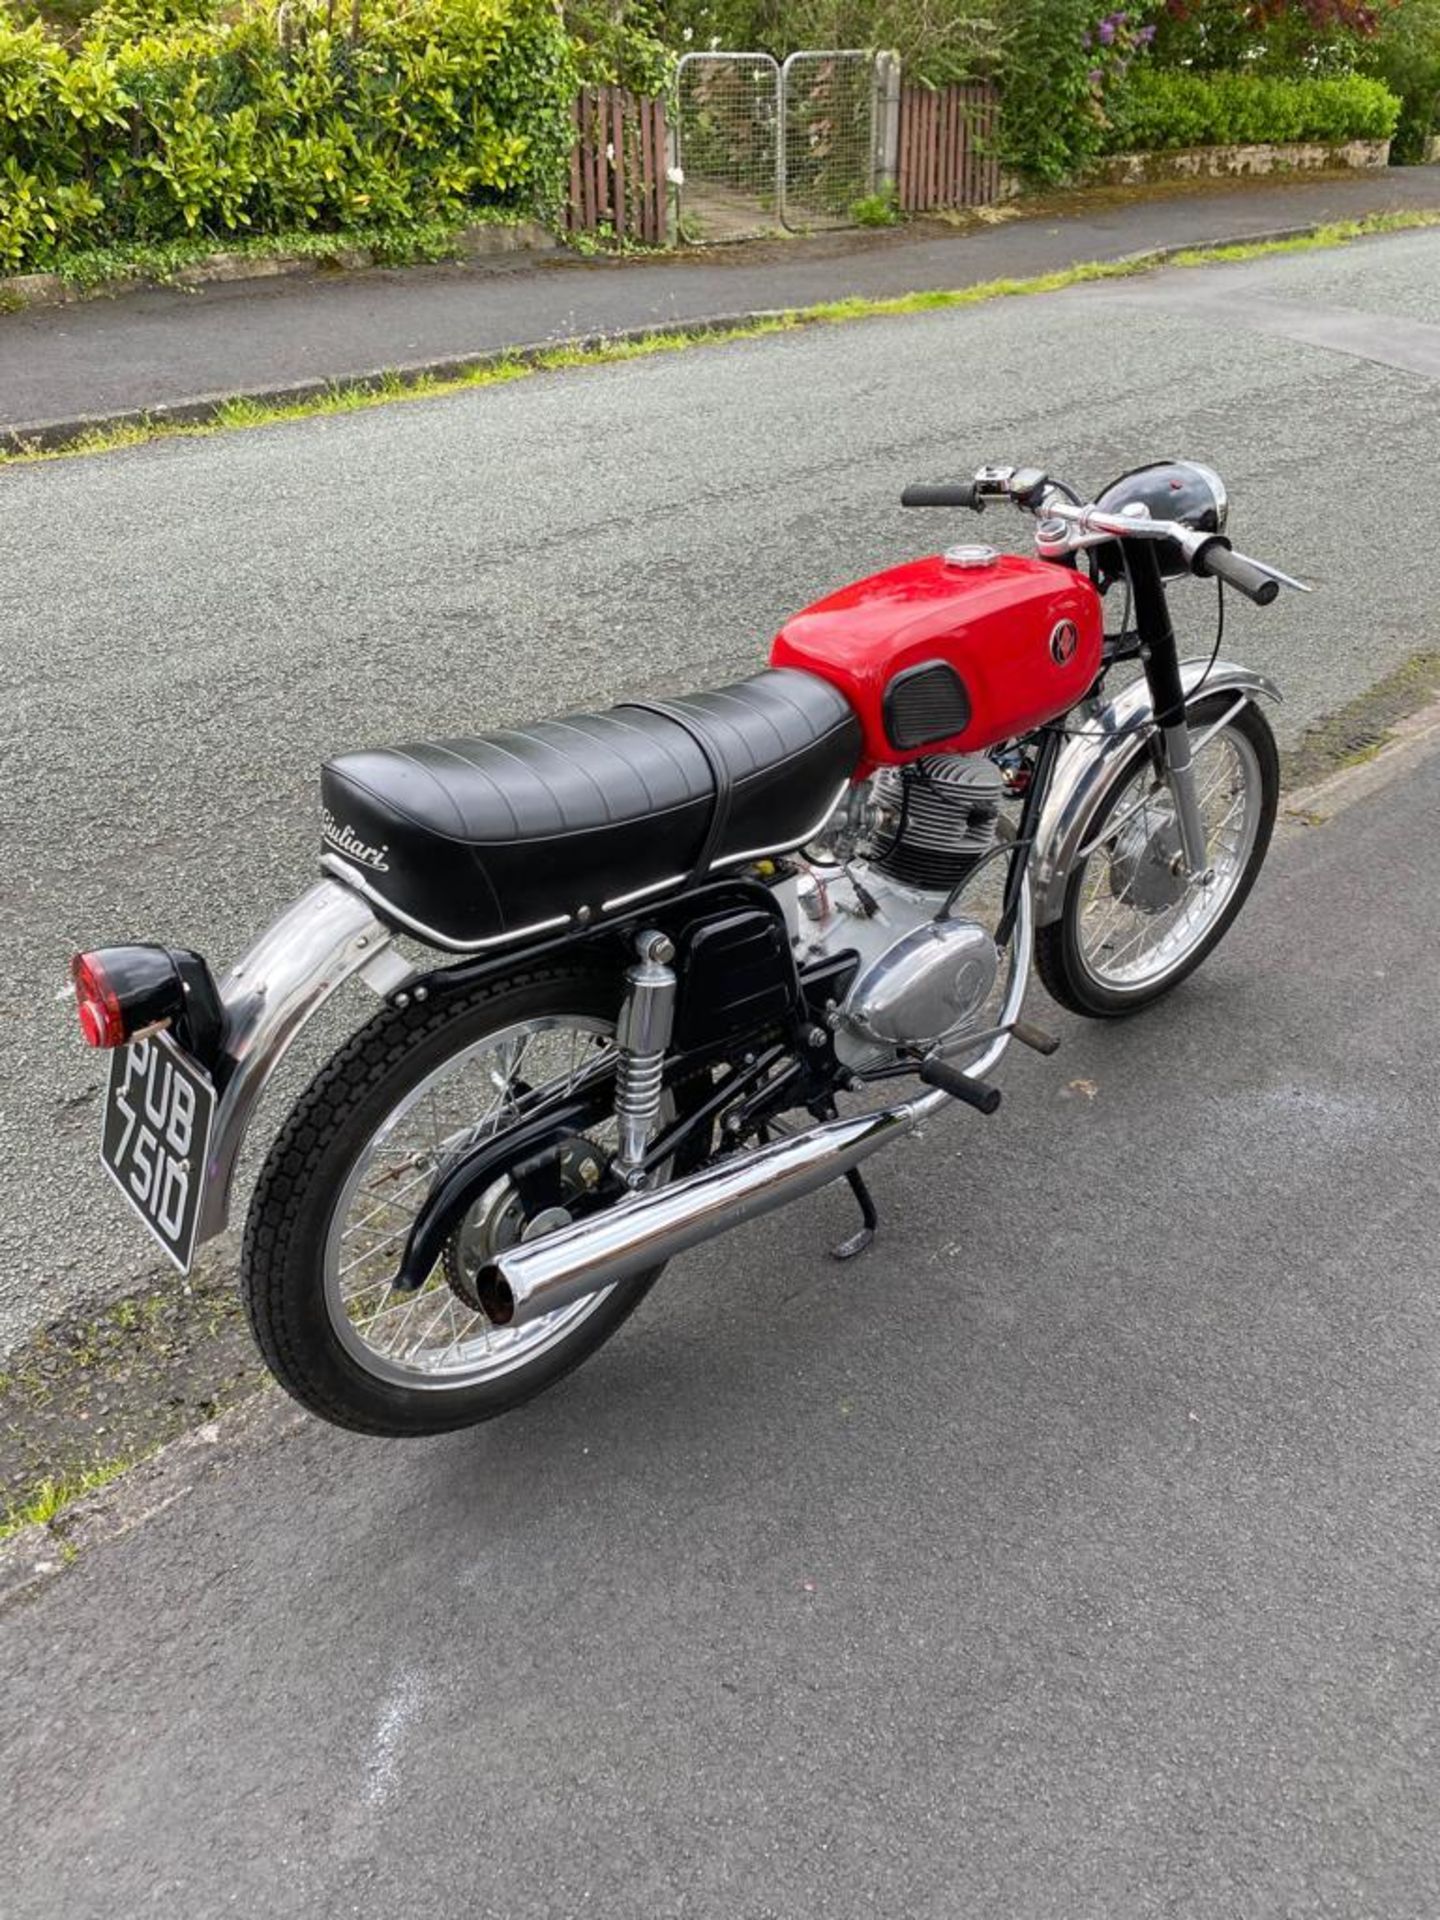 A 1966 GILERA 124 SPORT MOTORCYCLE, OHV, 5 SPEED, MATCHING FACTORY NUMBERS, IMPORTED IN APPROX - Image 3 of 5